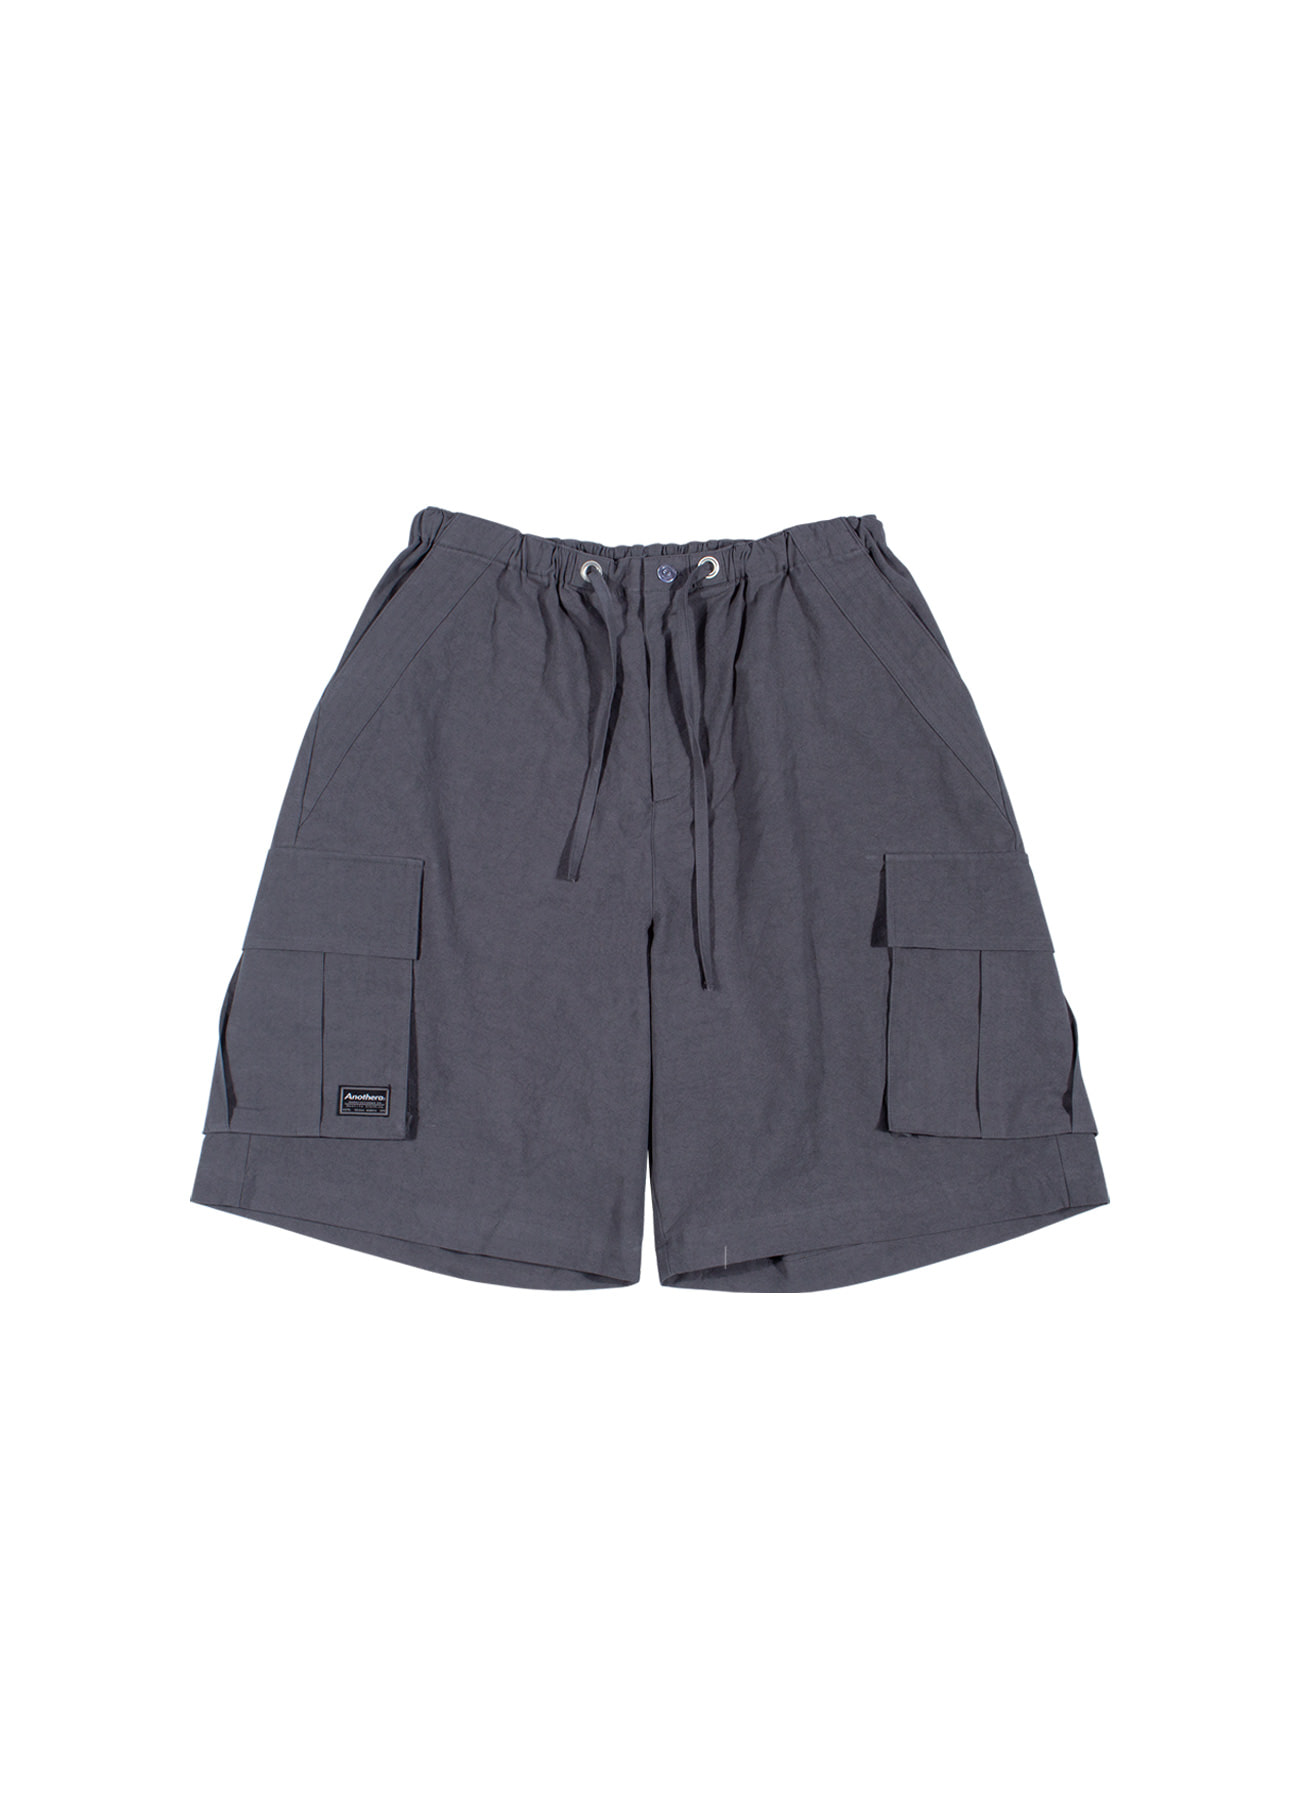 POCKET WIDE CARGO SHORTS (Charcoal)